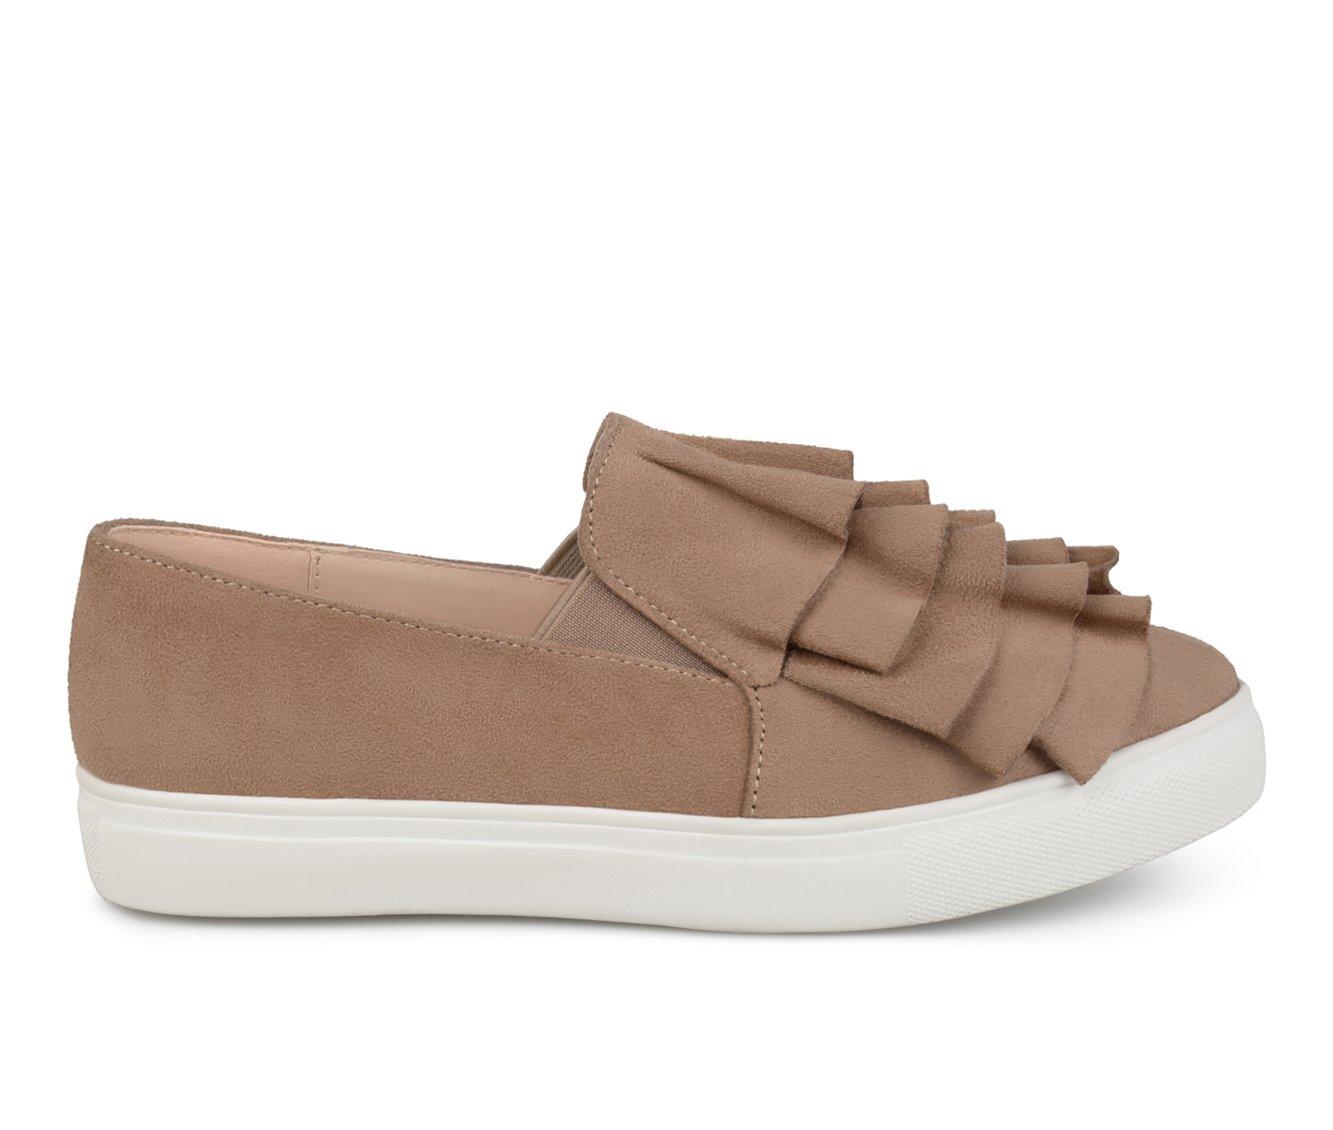 Women's Journee Collection Glint Slip-On Shoes